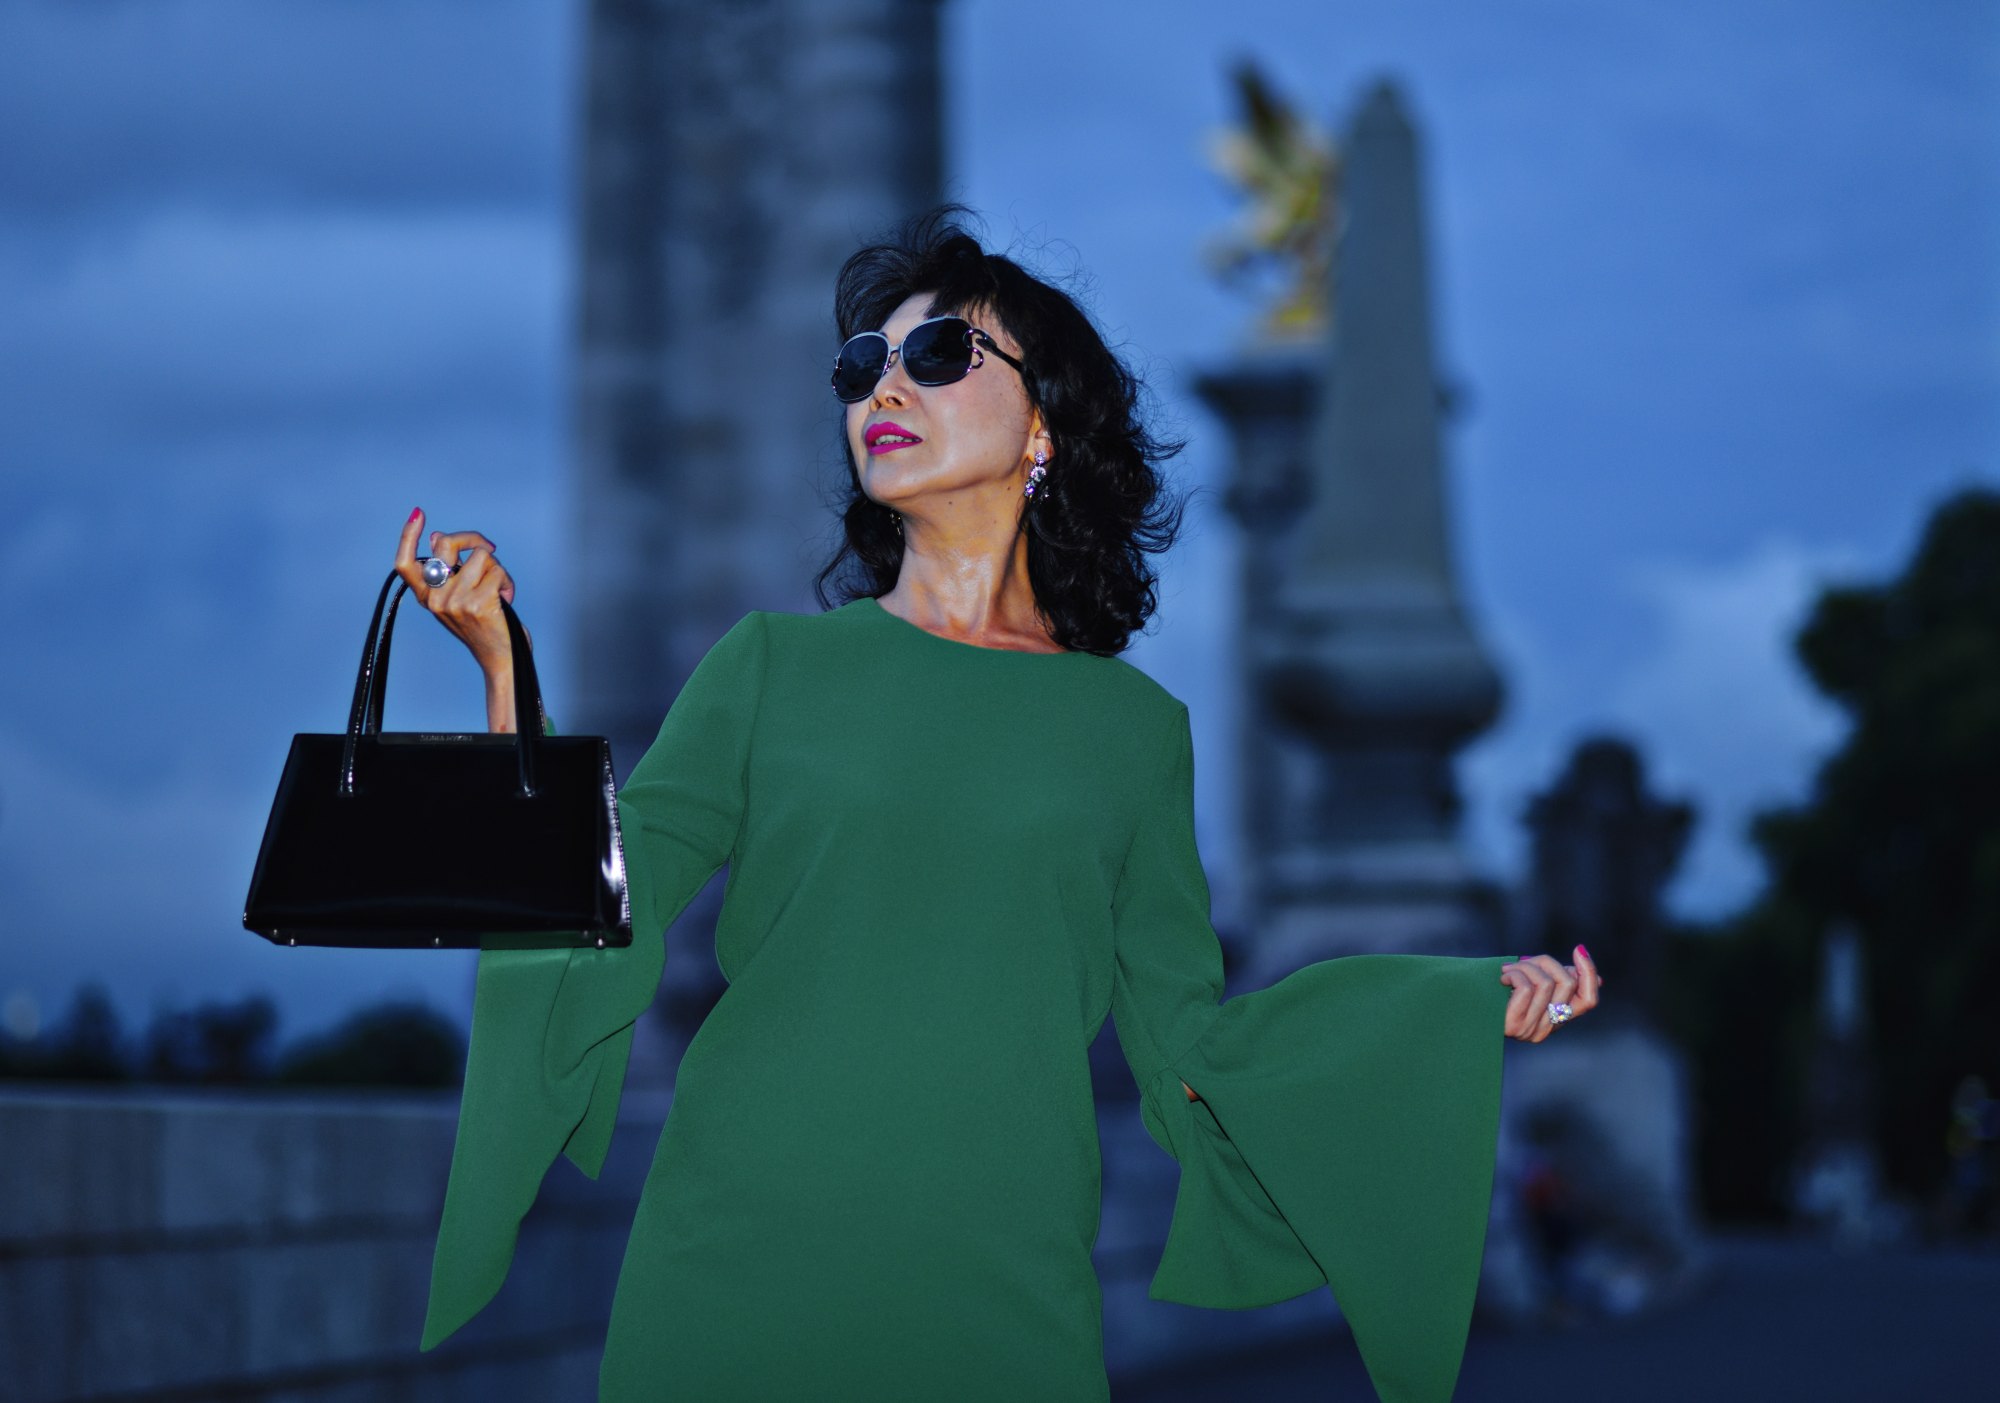 A fashion night shoot on Pont Alexandre III in Paris. Travel fashion and lifestyle photography by Kent Johnson.